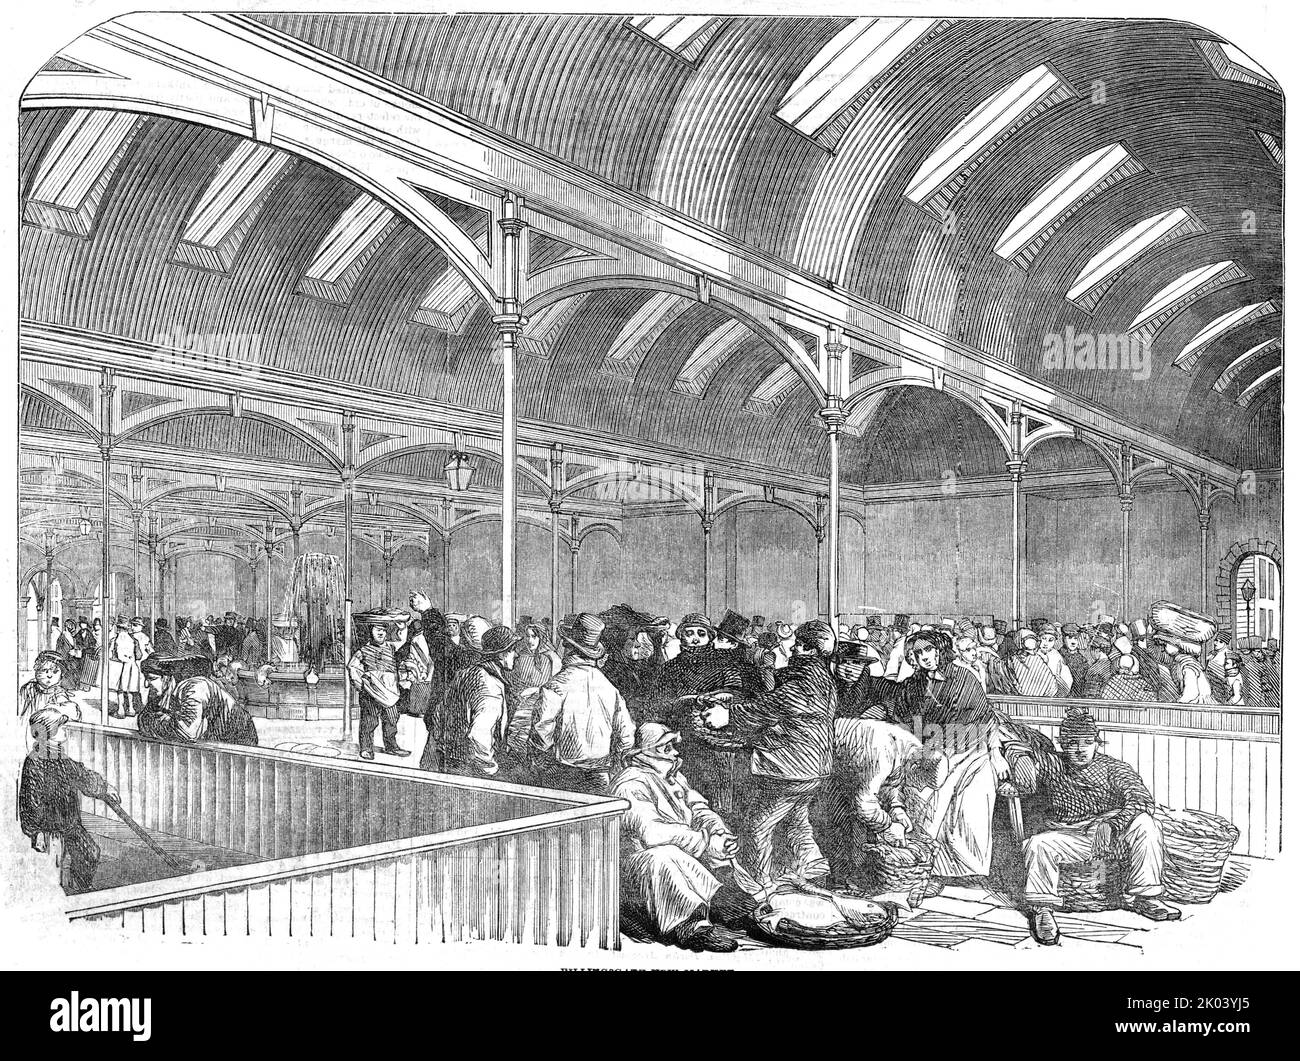 Billingsgate New Market [in London], 1854. 'The New Market is covered with semicircular roofs of galvanised corrugated iron, supported on light iron columns and girders...a glass roof also runs from north to south...A plentiful supply of water is insured...by means of a fountain...which is ornamented with figures of dolphins, from whose mouths water is continually flowing. For the purpose of cleansing, and assisting in the ventilation both of the Upper and Lower Markets, a continual flow of water is supplied through a series of iron gutters in the pavement, covered with trellis gratings, the w Stock Photo